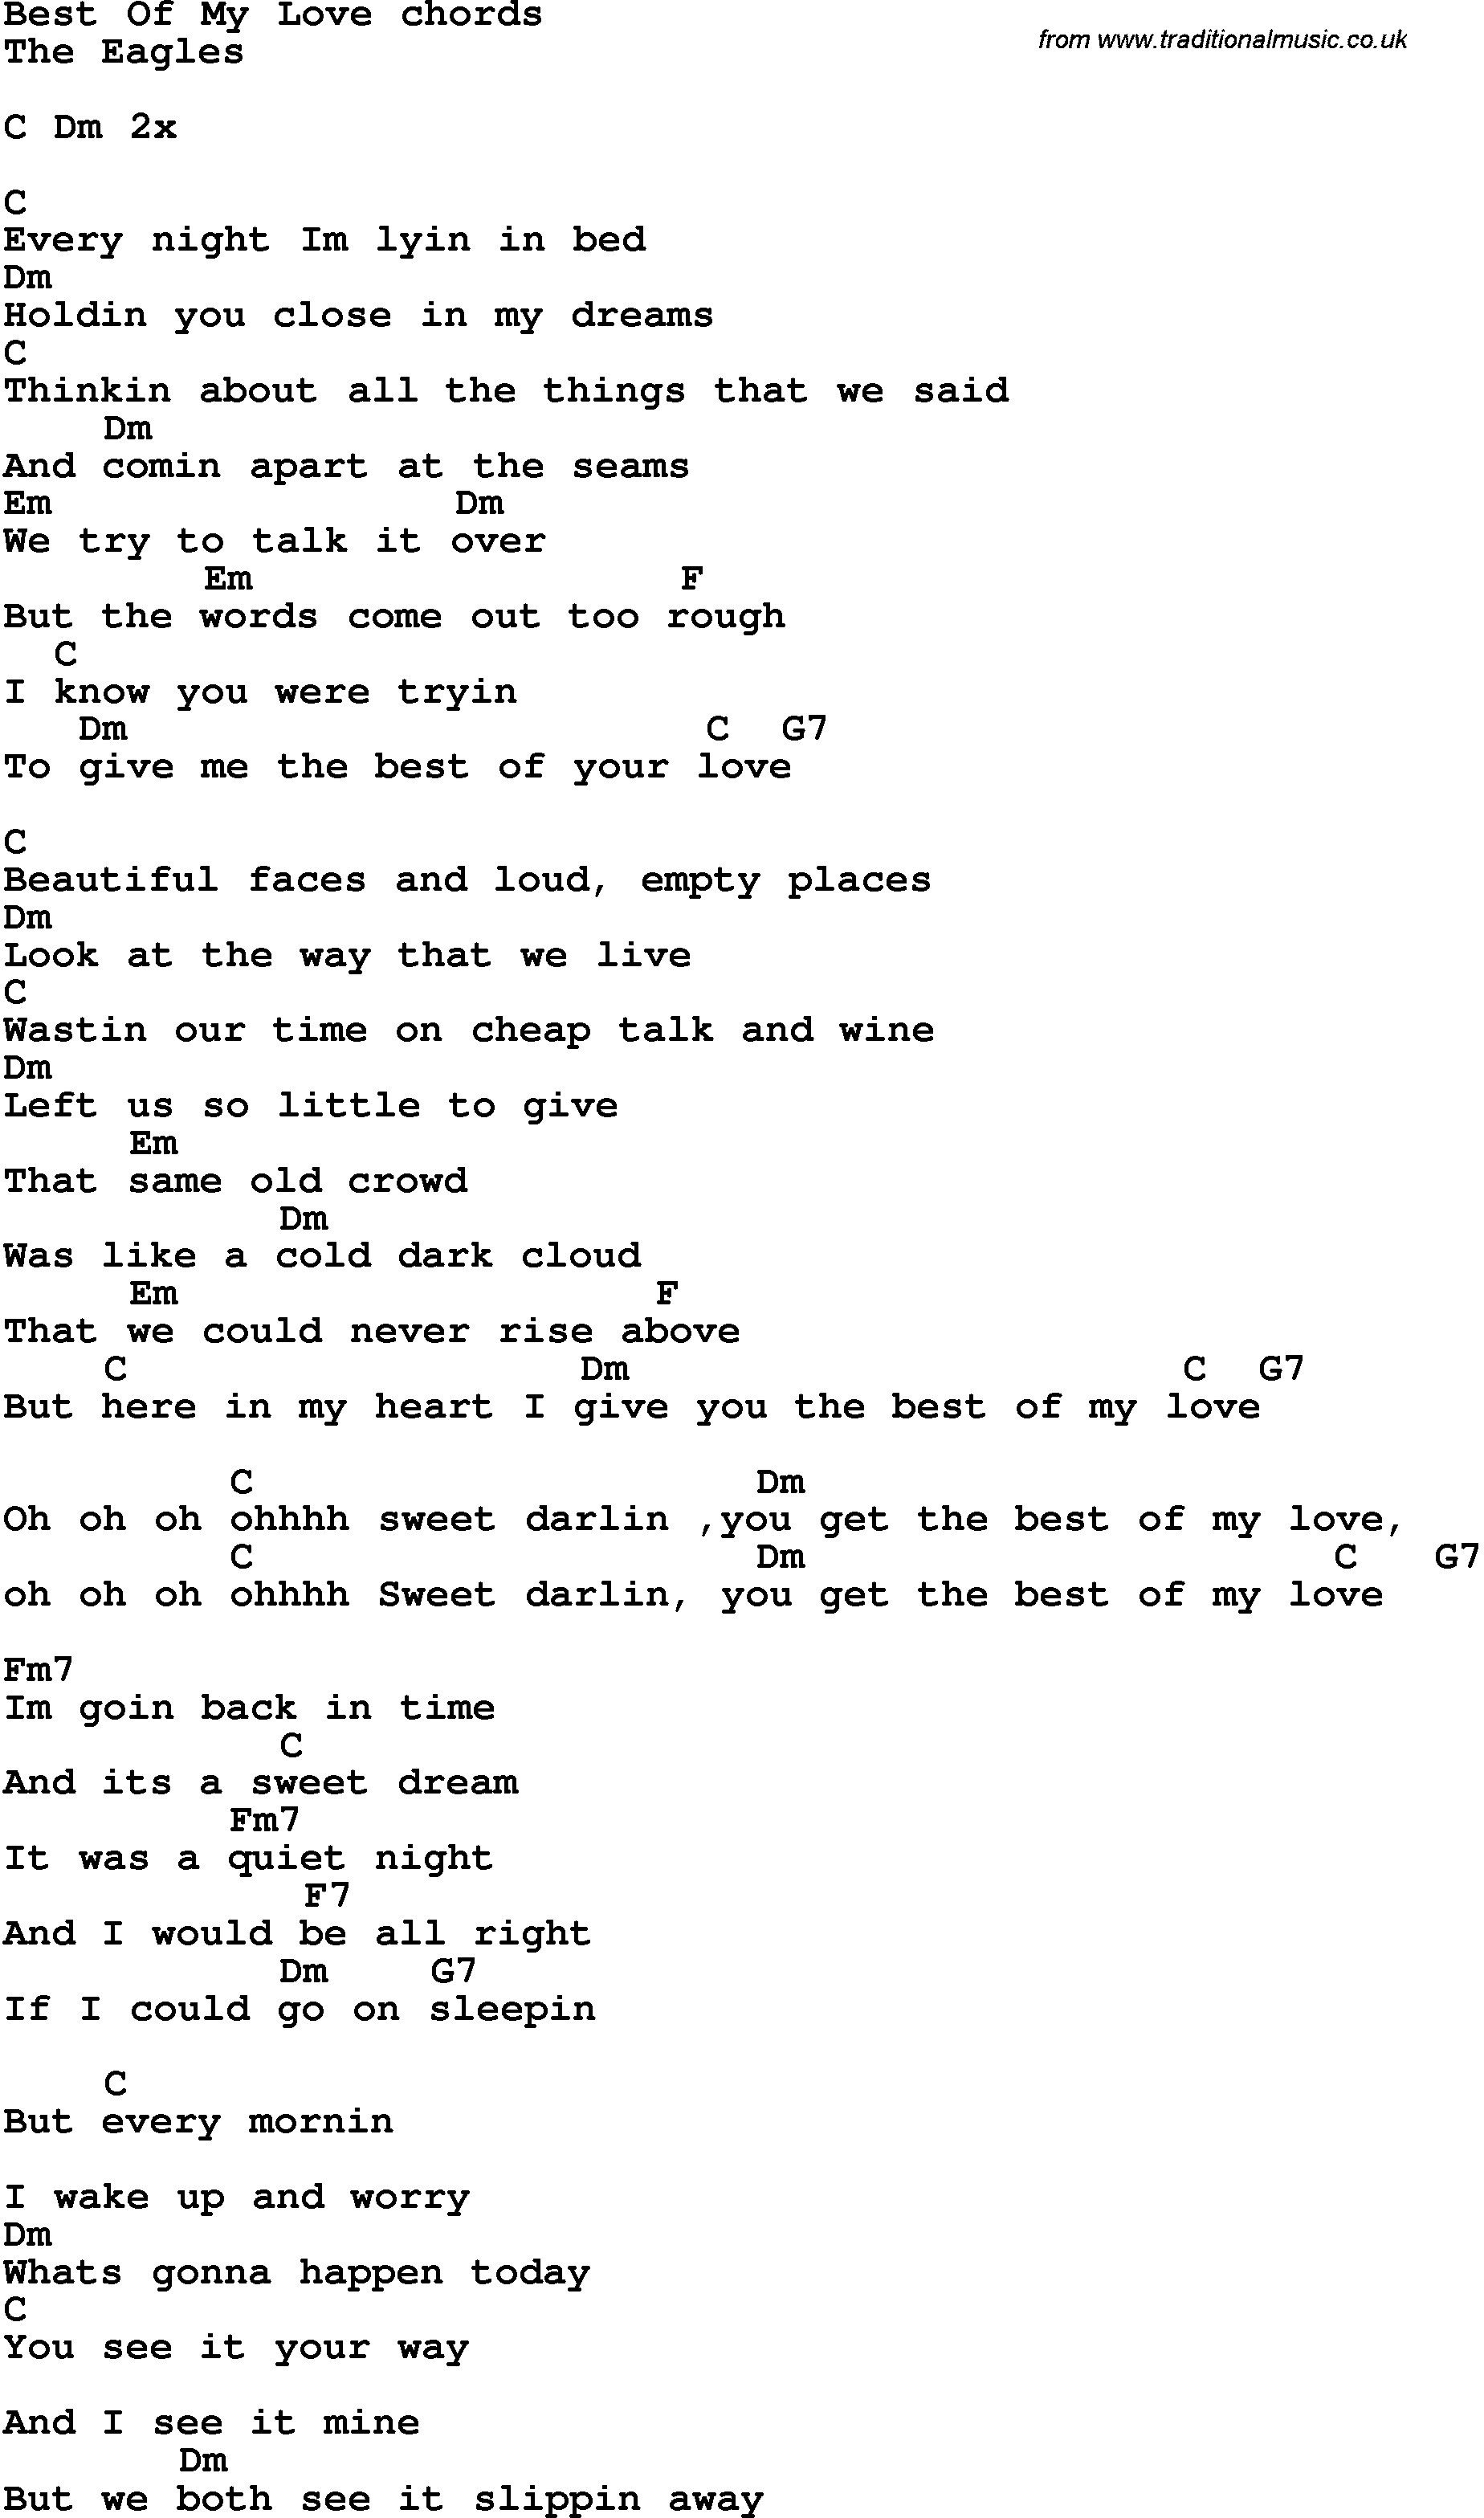 Give Me Love Chords Song Lyrics With Guitar Chords For Best Of My Love